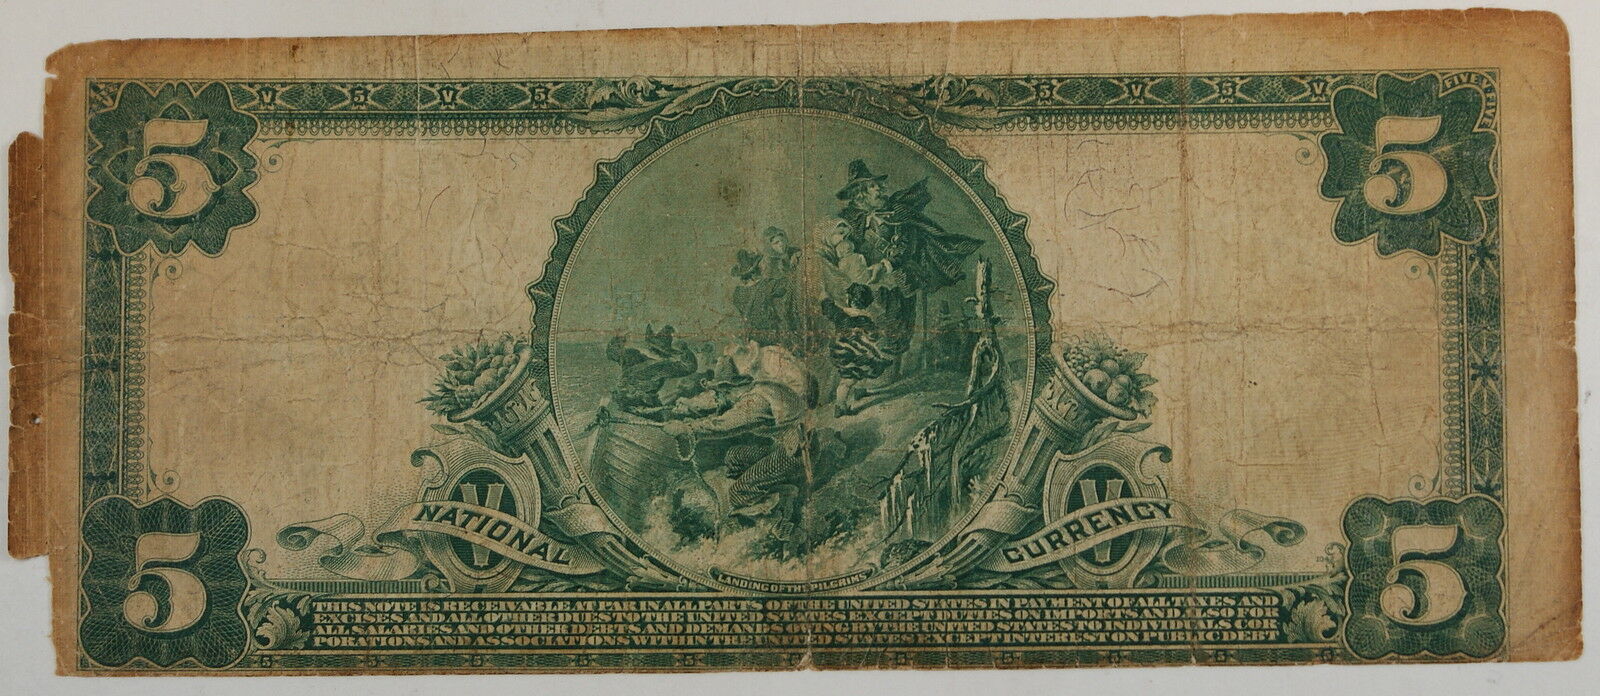 Series 1902 $5 National Currency Note, Castleton NY, E 5816